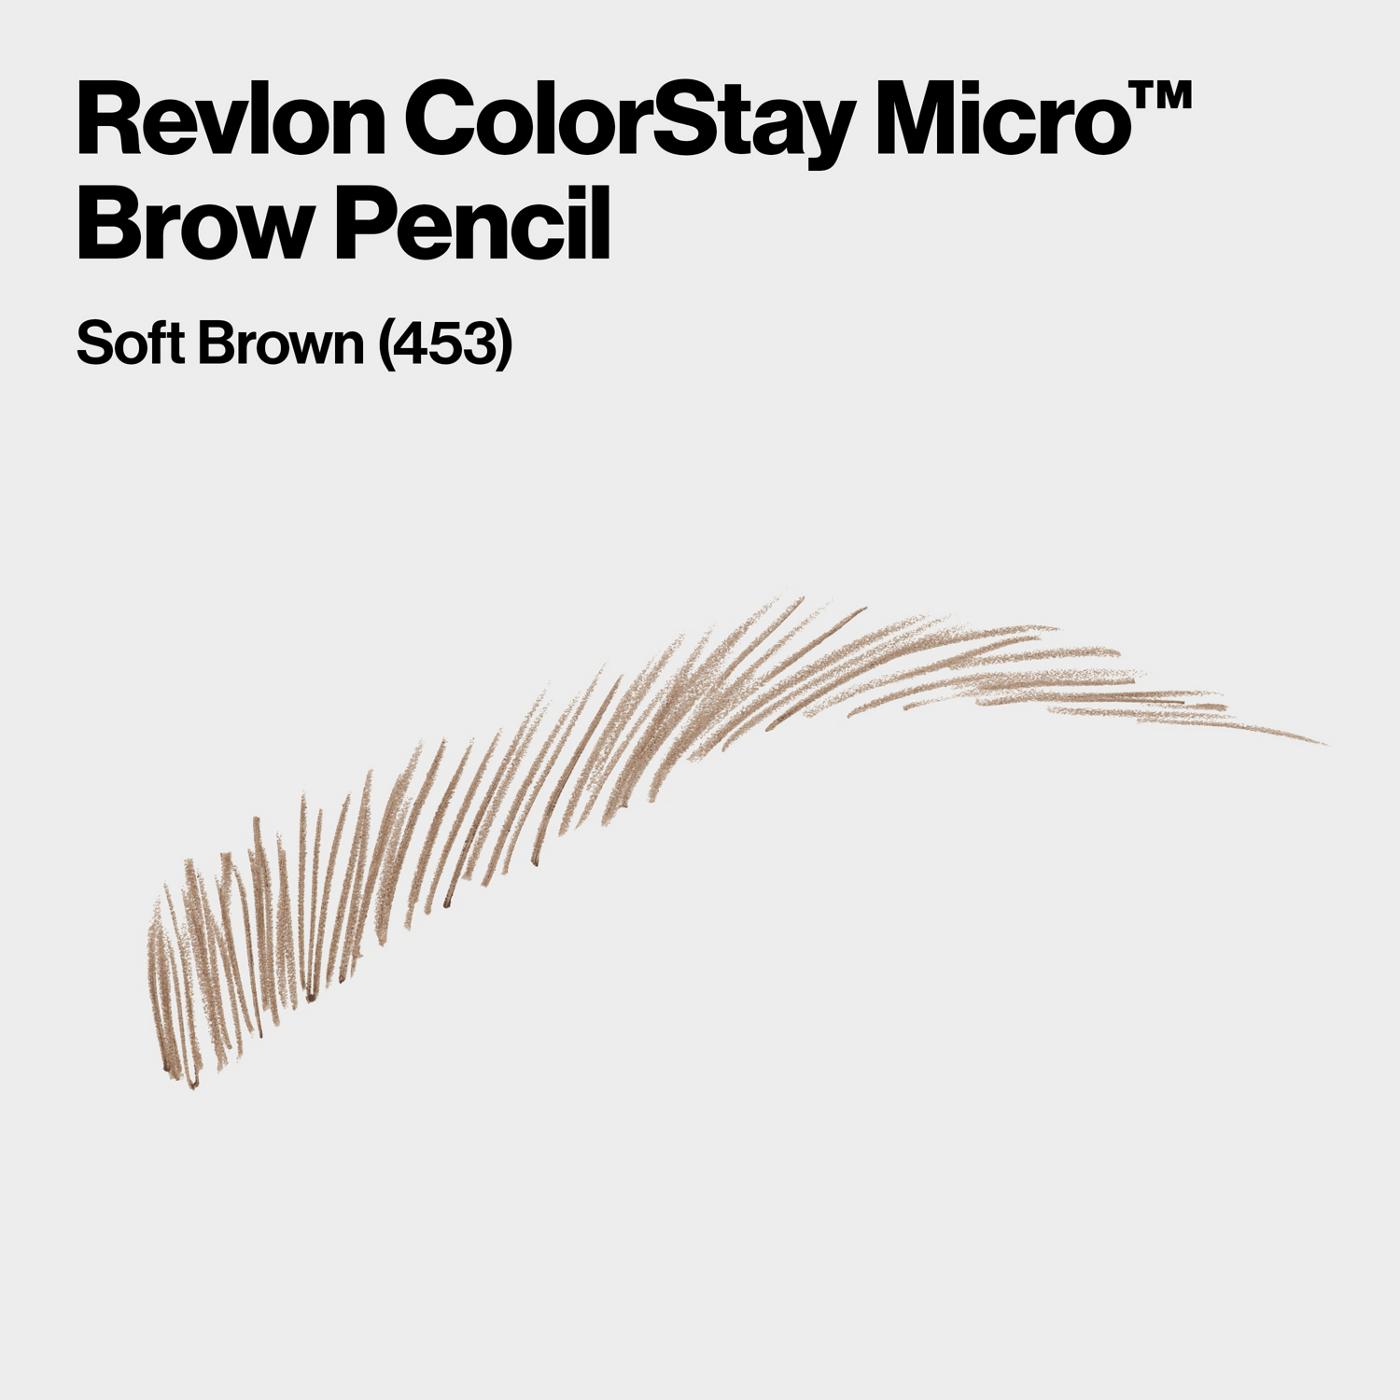 Revlon ColorStay Micro Brow Pencil - Soft Brown; image 5 of 12